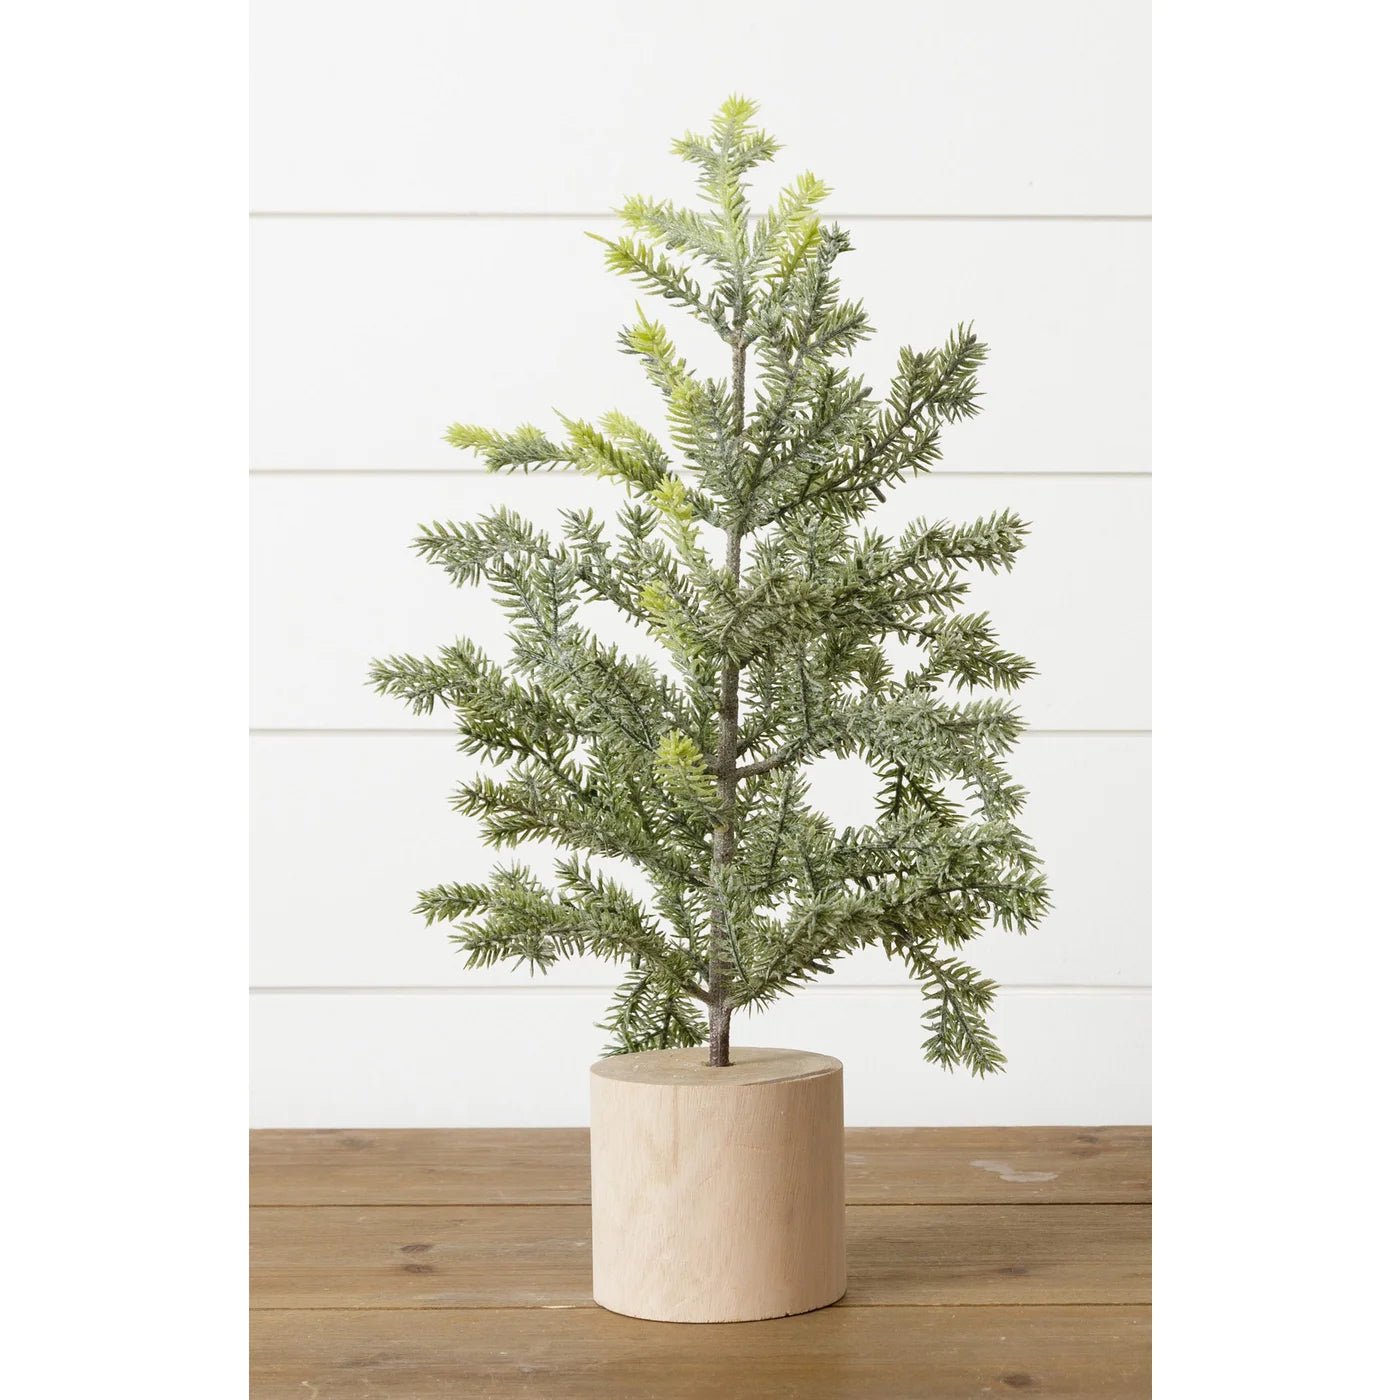 Copy of Frosted Pine in Wooden Base, 18" - The Brass Bee